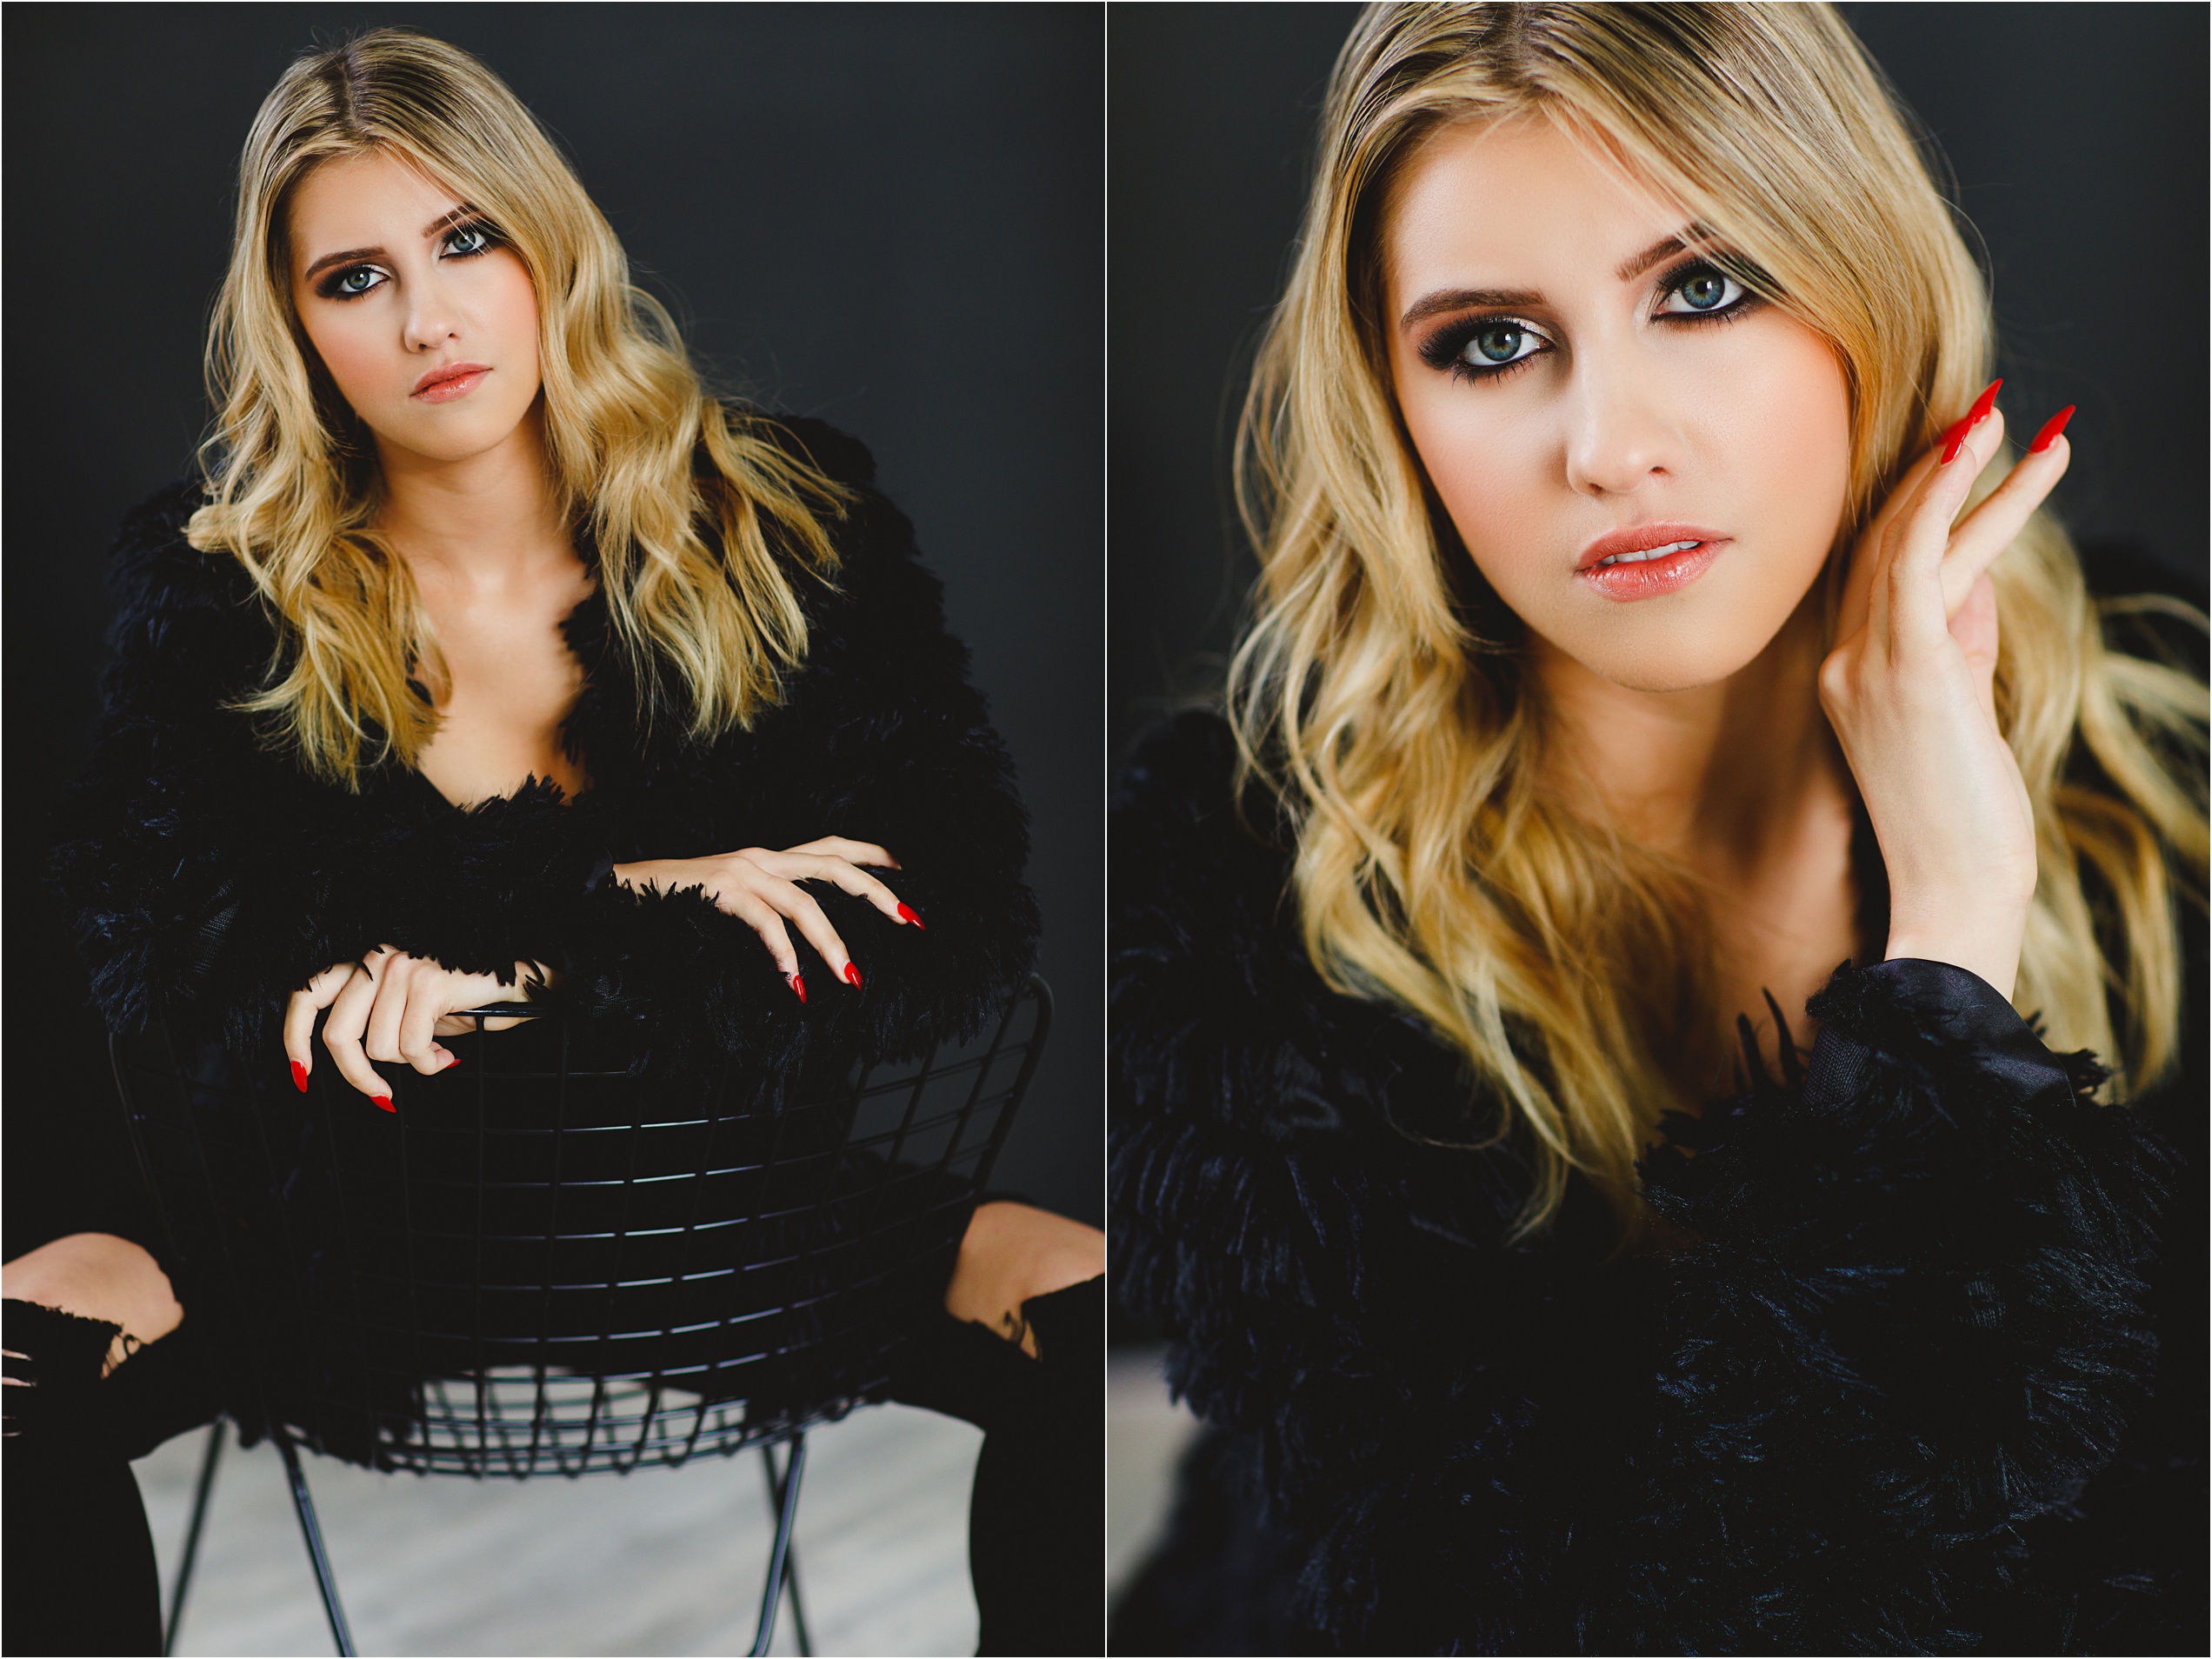 Andrina posing in the studio in a black chair and head to toe black trendy outfit and smokey eye makeup.